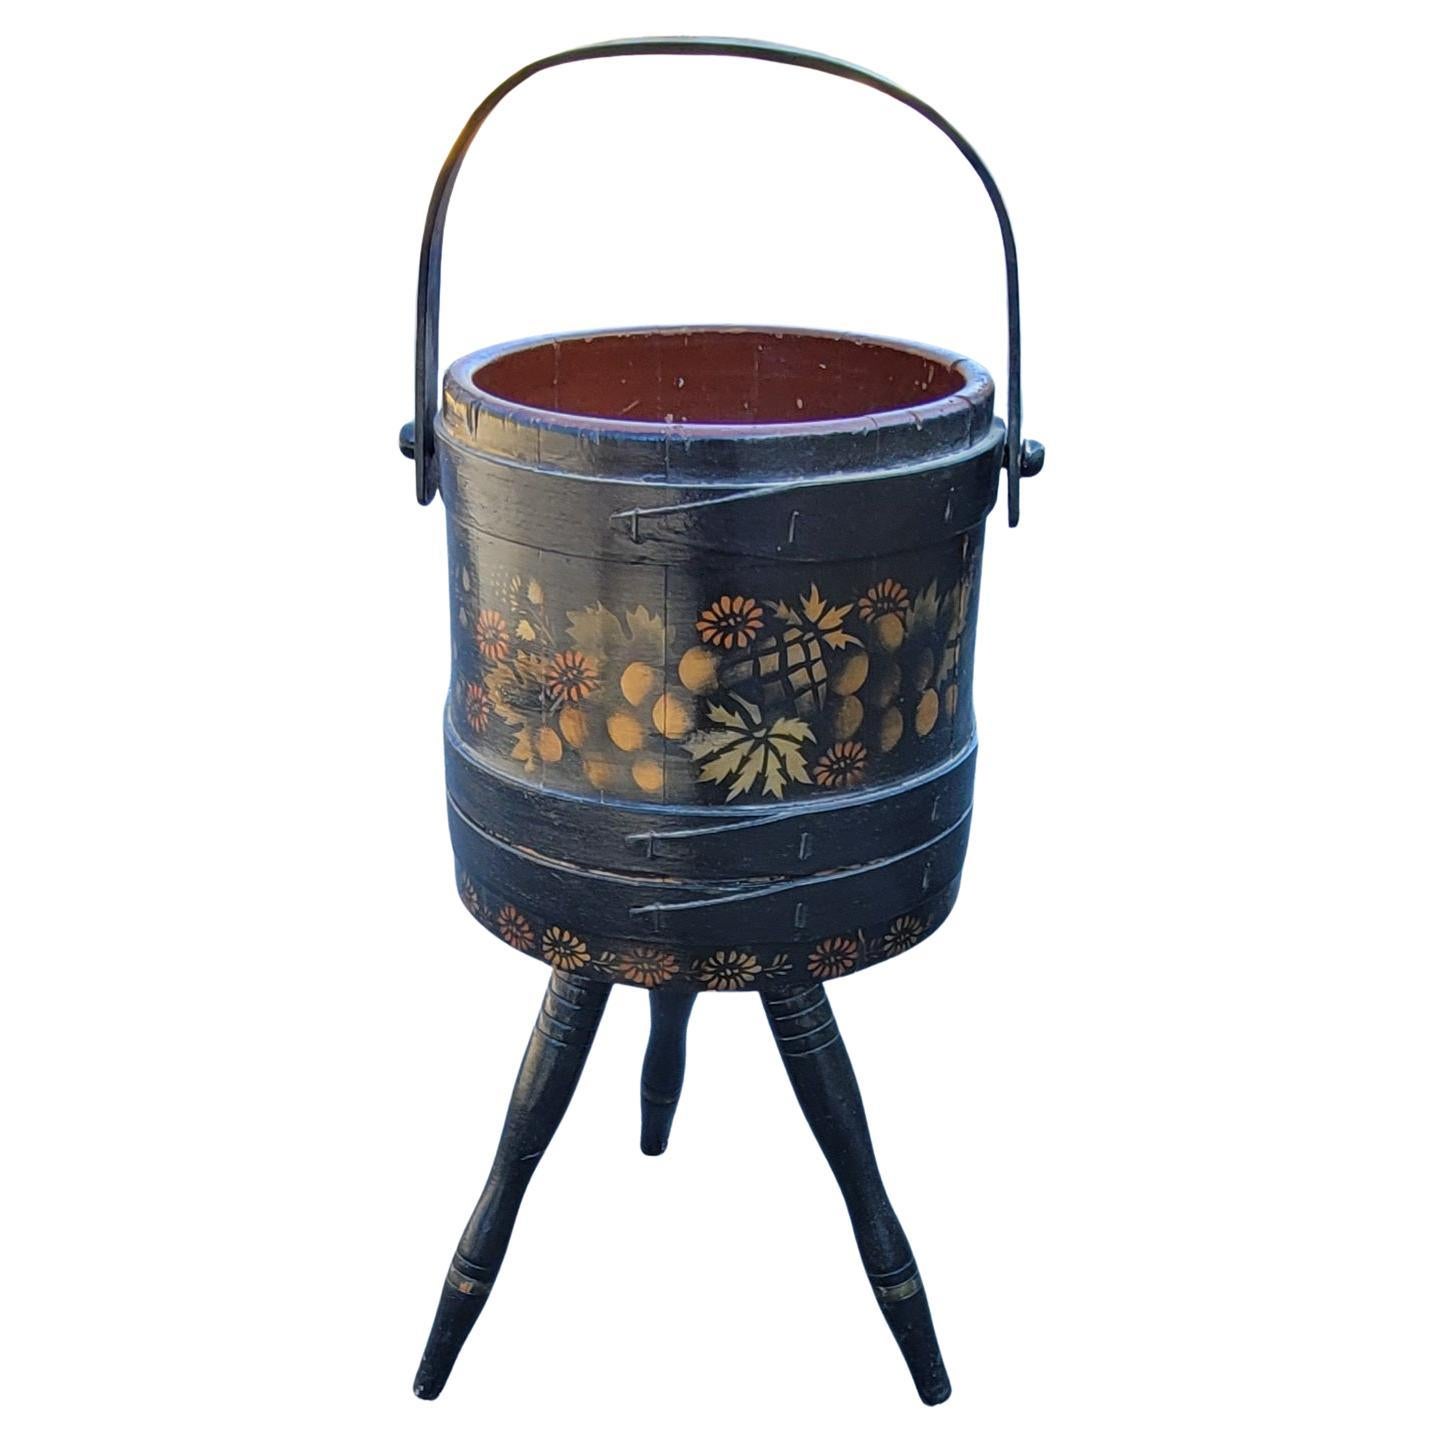 1920s Hand-Crafted, Painted and Decorated Tripod Firkin or Sewing Bucket